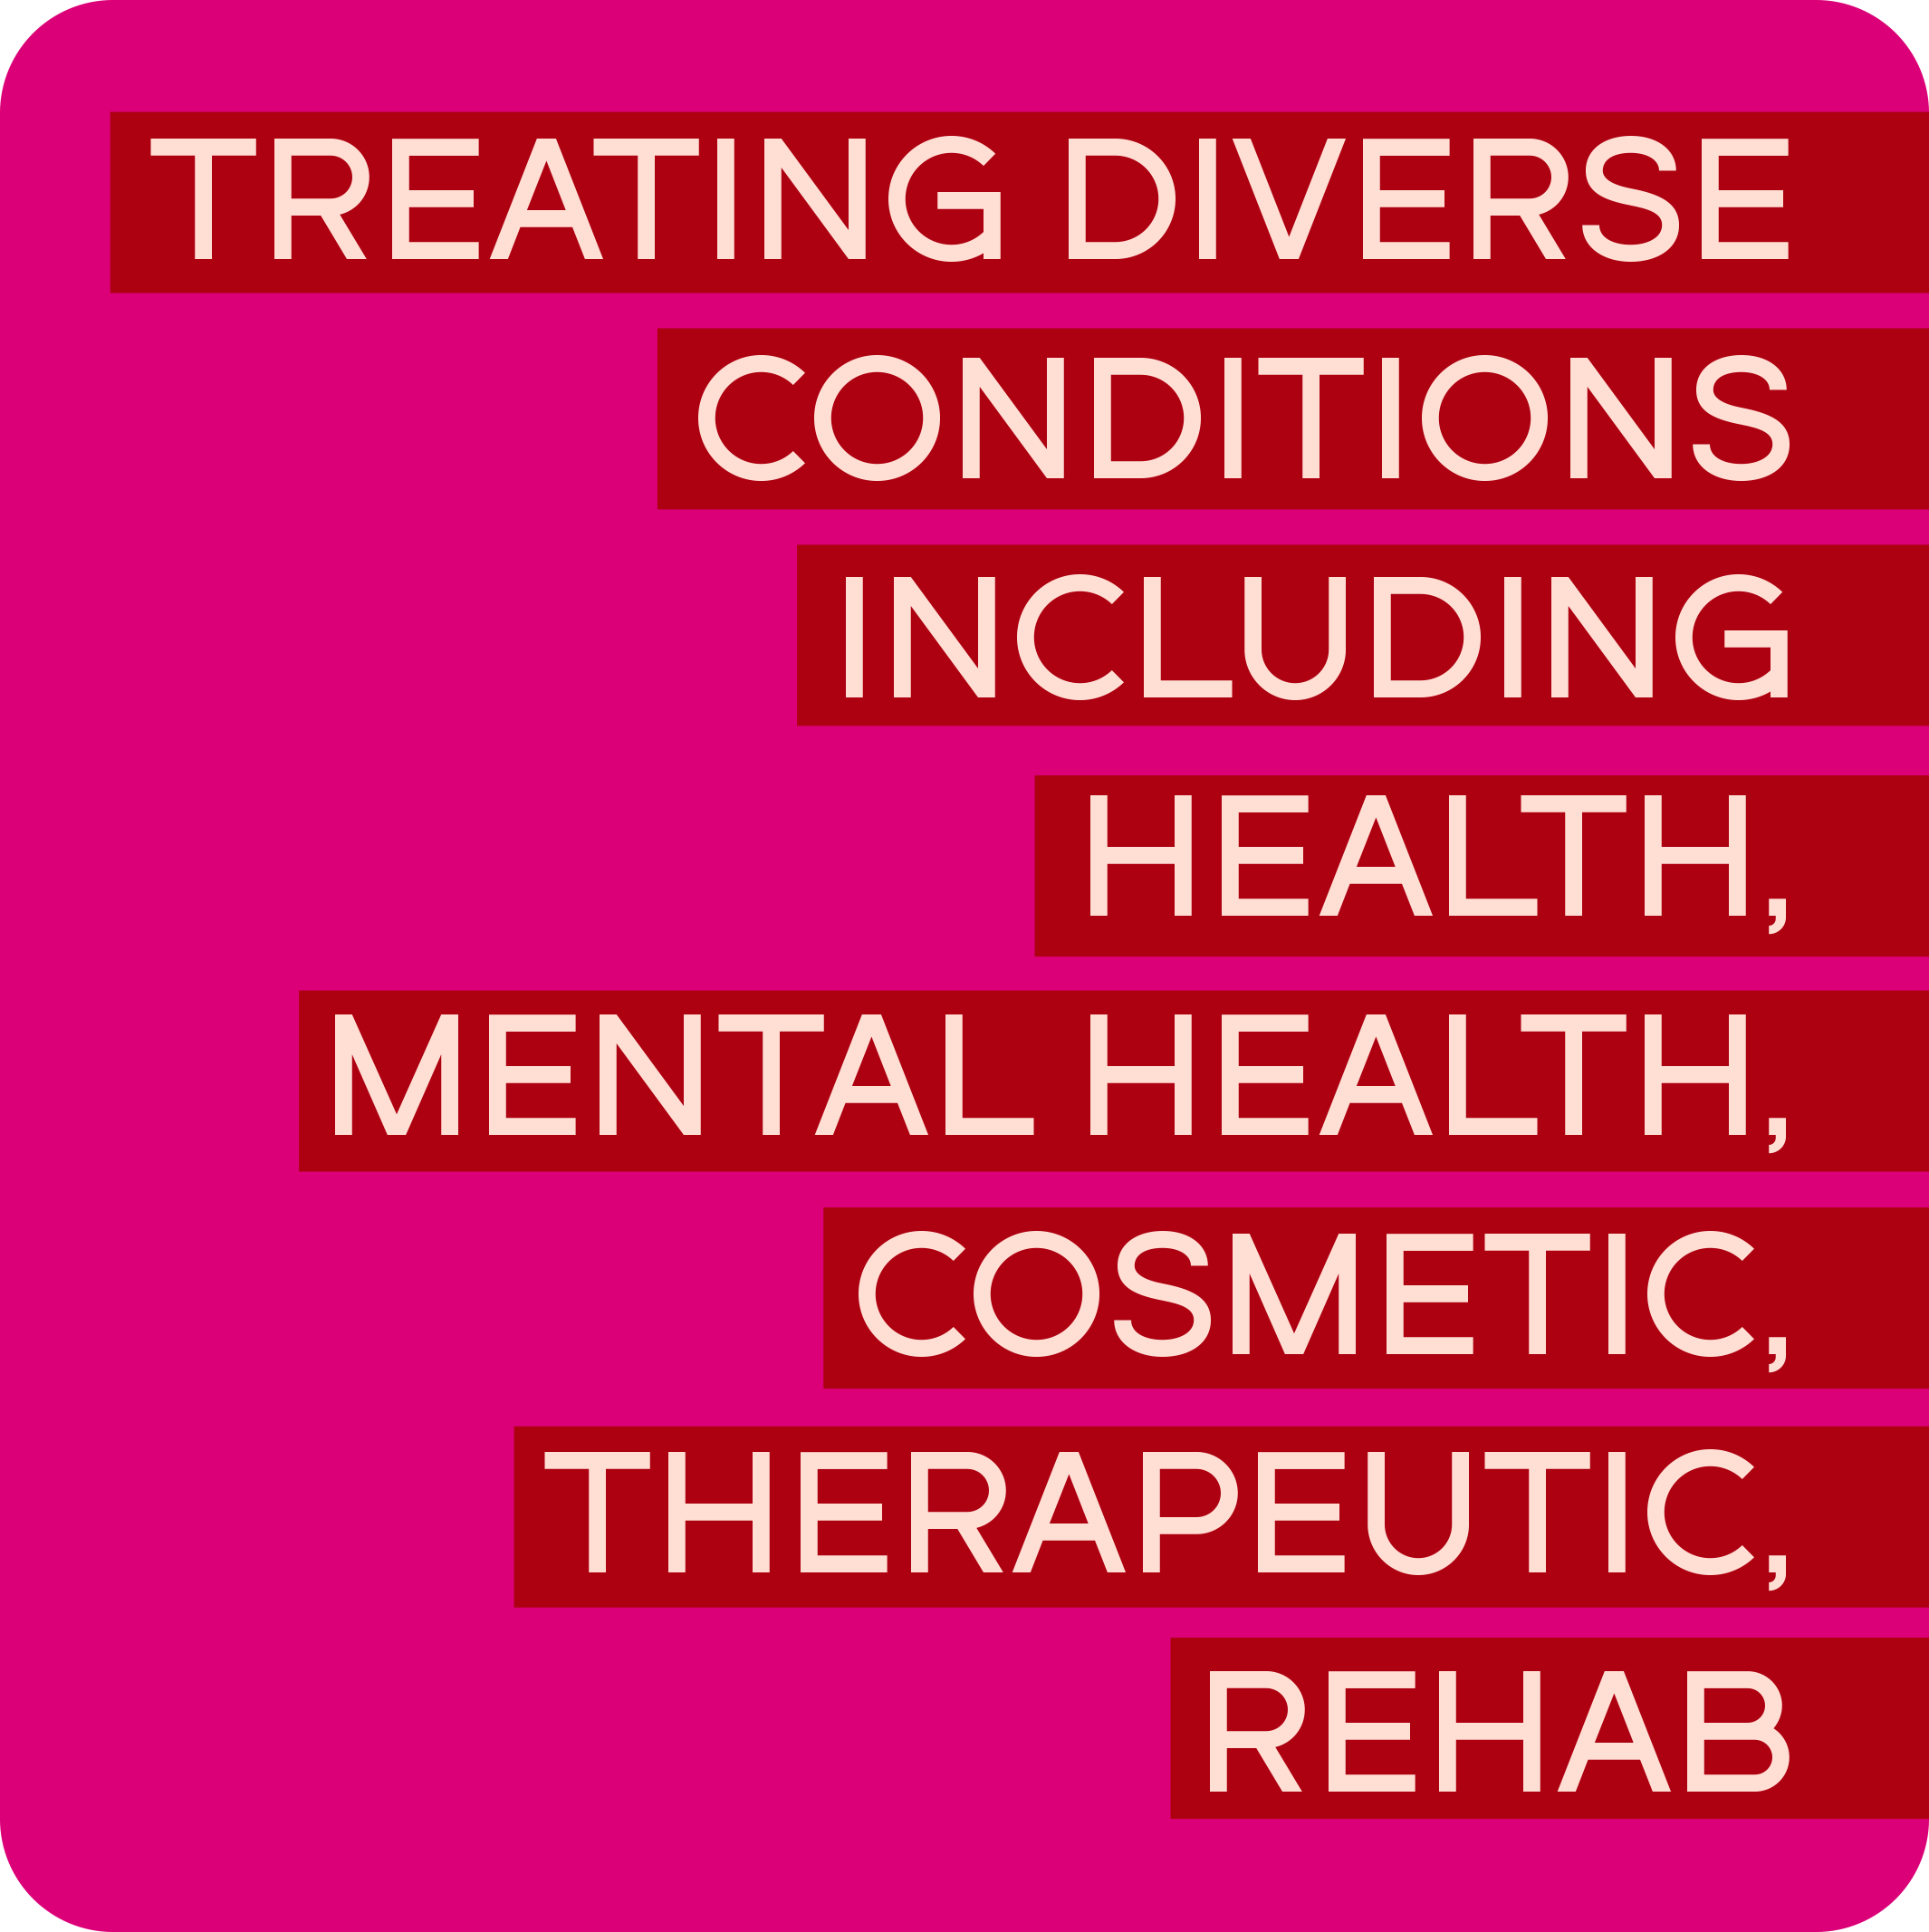 Treating diverse conditions